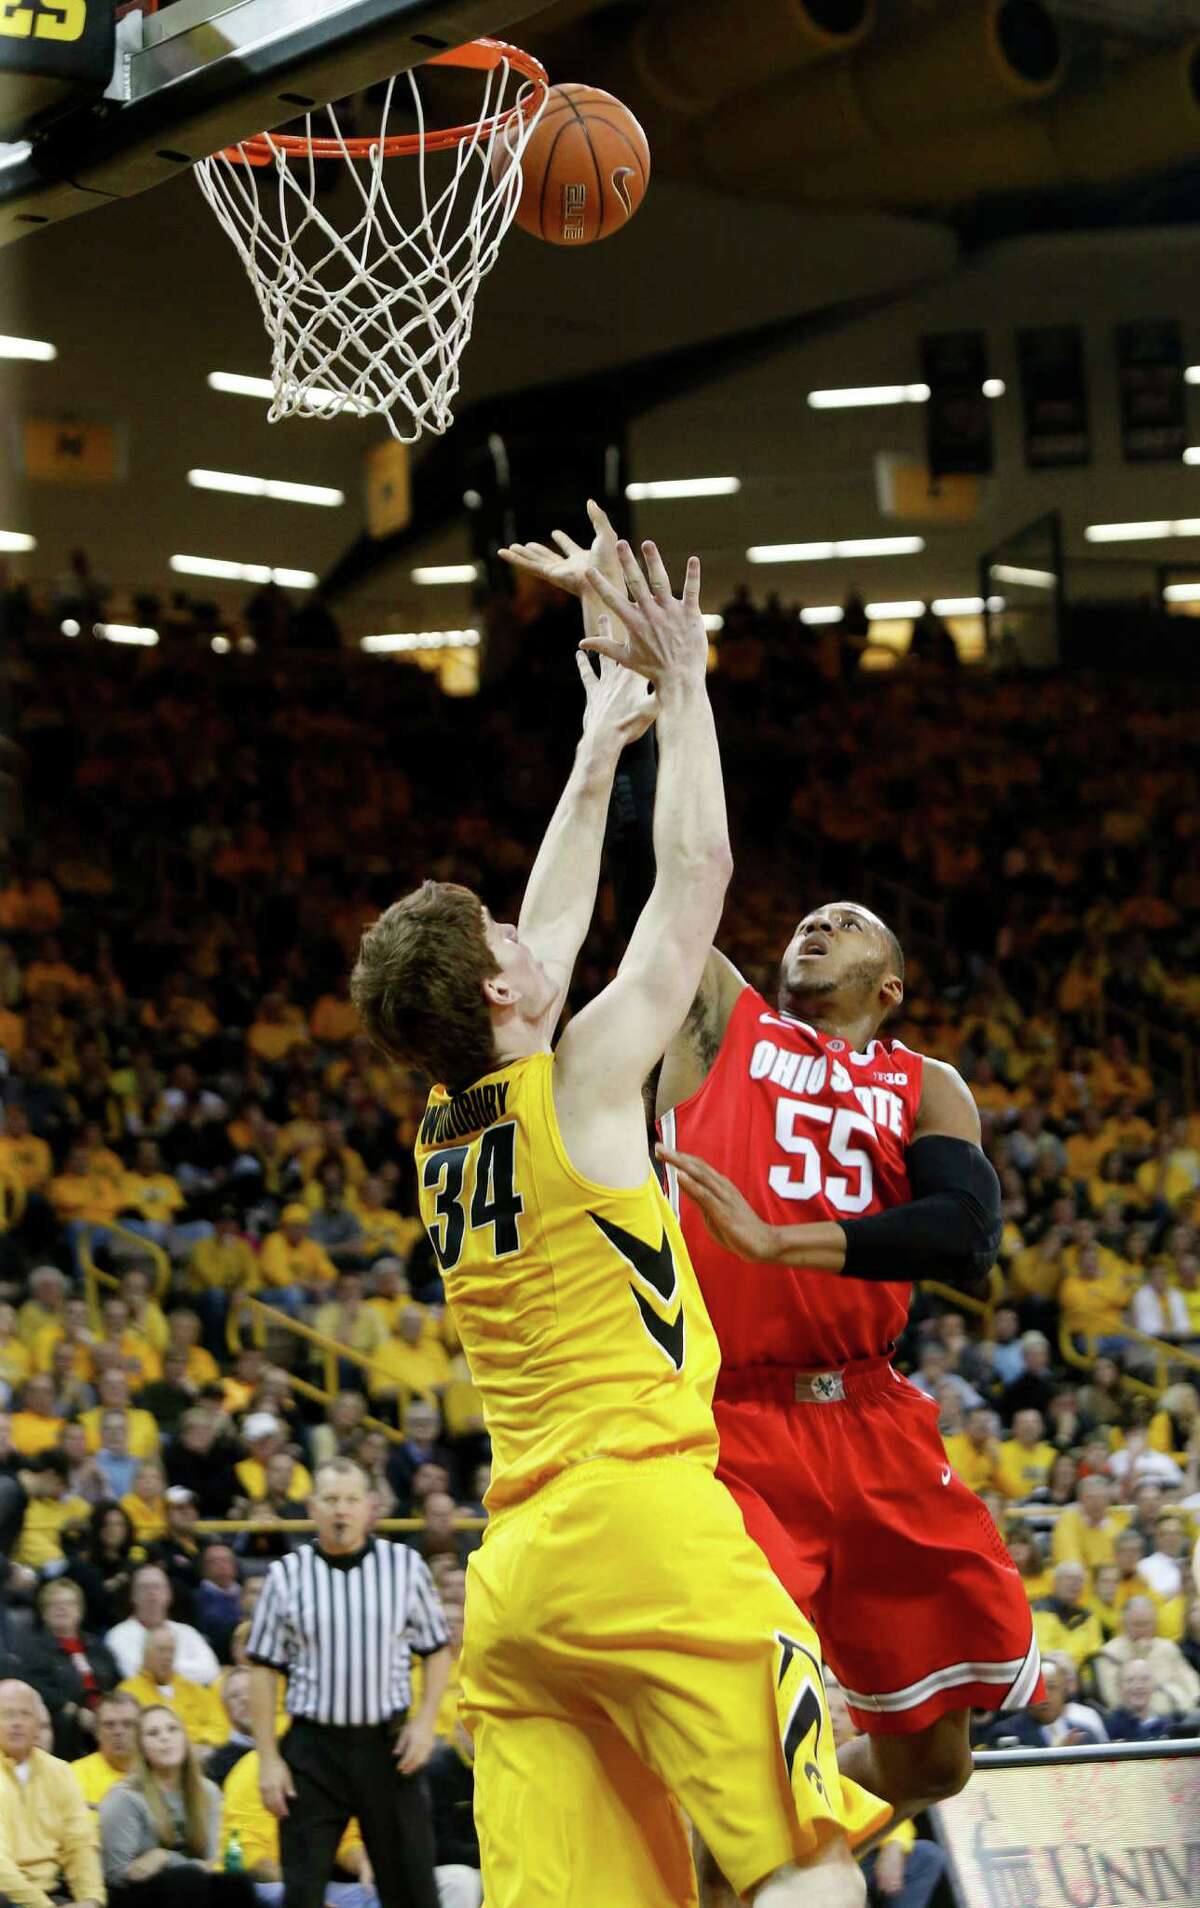 Iowa center Adam Woodbury (34) defends on a shot by Ohio State center Trey McDonald (55) during the first half of an NCAA college basketball game Tuesday, Feb. 4, 2014, in Iowa City, Iowa. (AP Photo/Cliff Jette) ORG XMIT: IAJC108